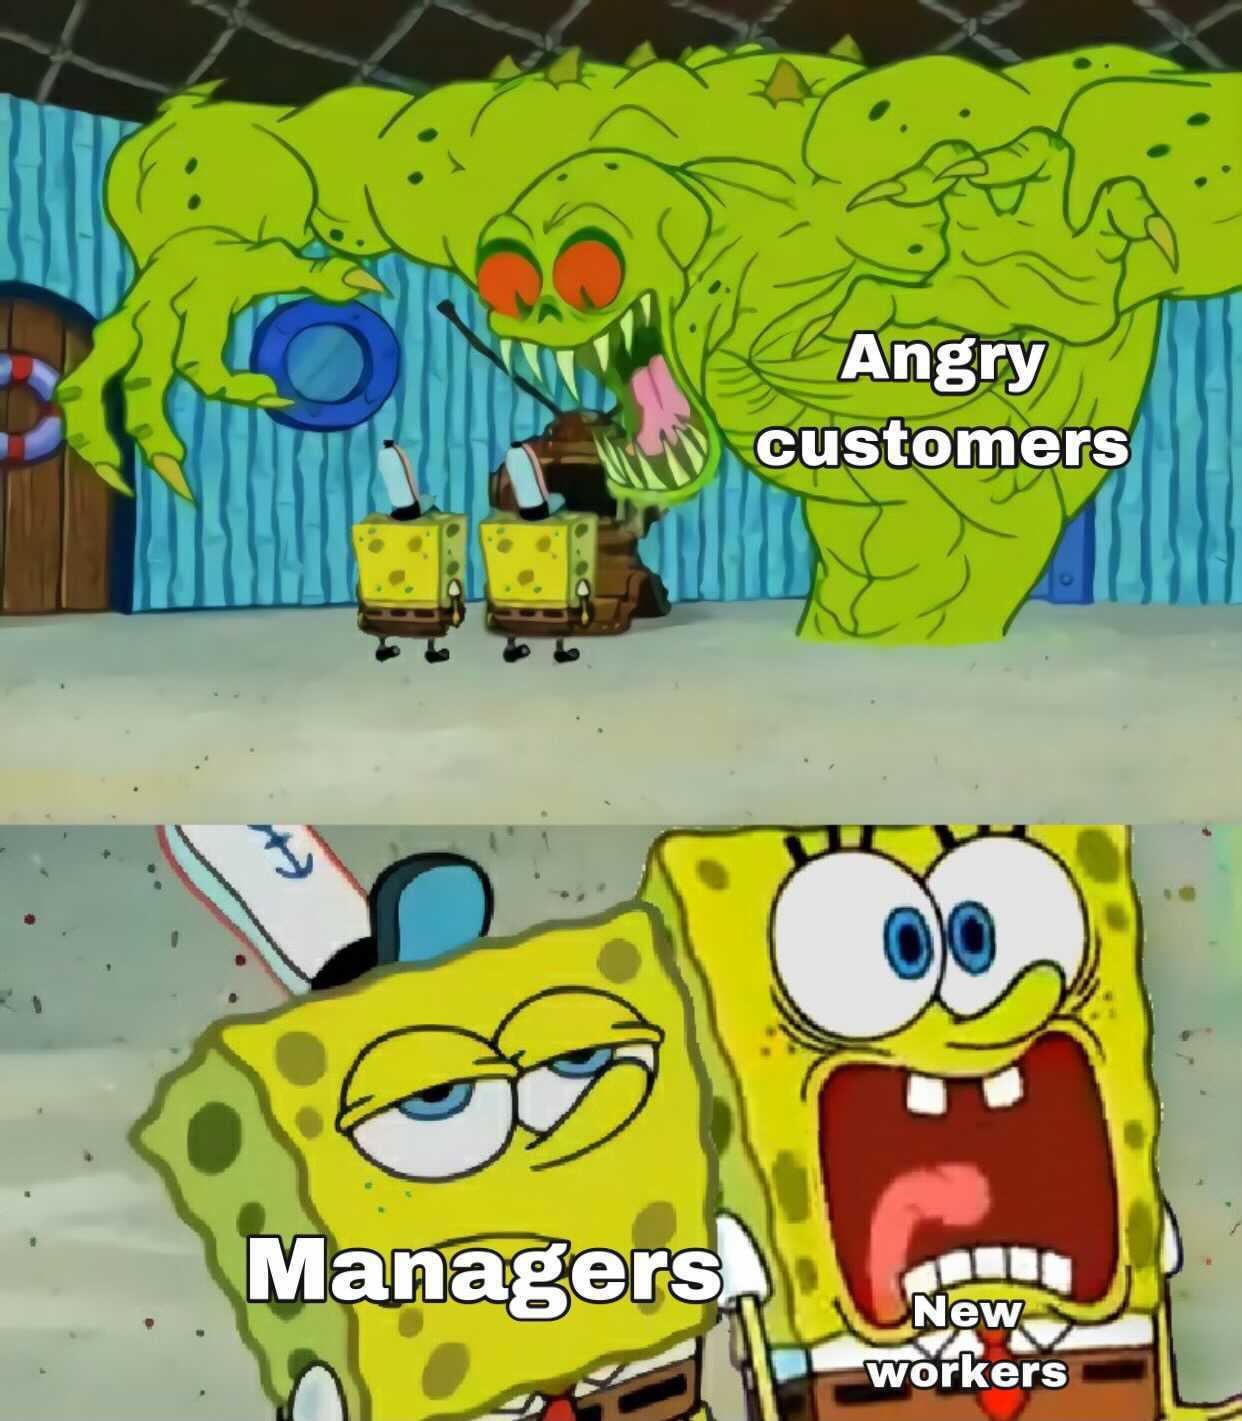 Angry customers Managers New workers